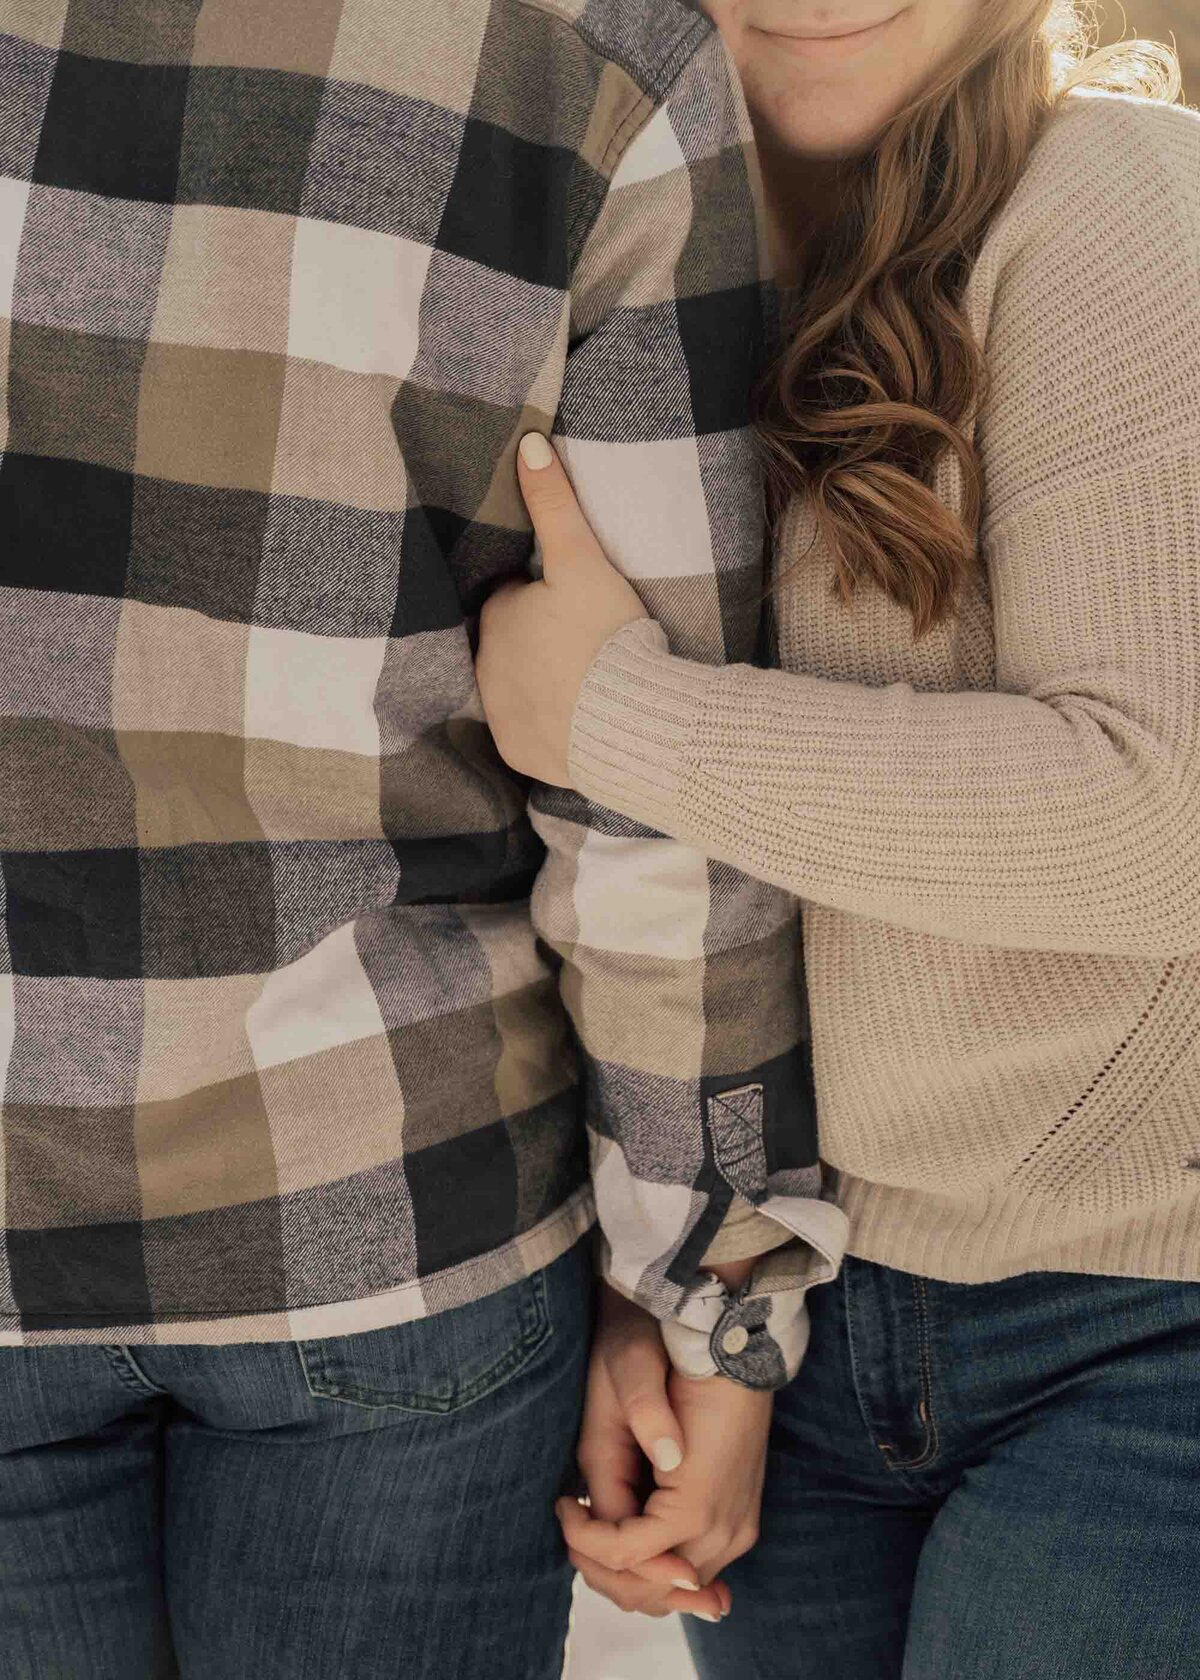 Maddie Rae Photography up close of just arms and hands. she is facing the camera and he is facing away. they are holding hands and she is holding his arm with the other hand